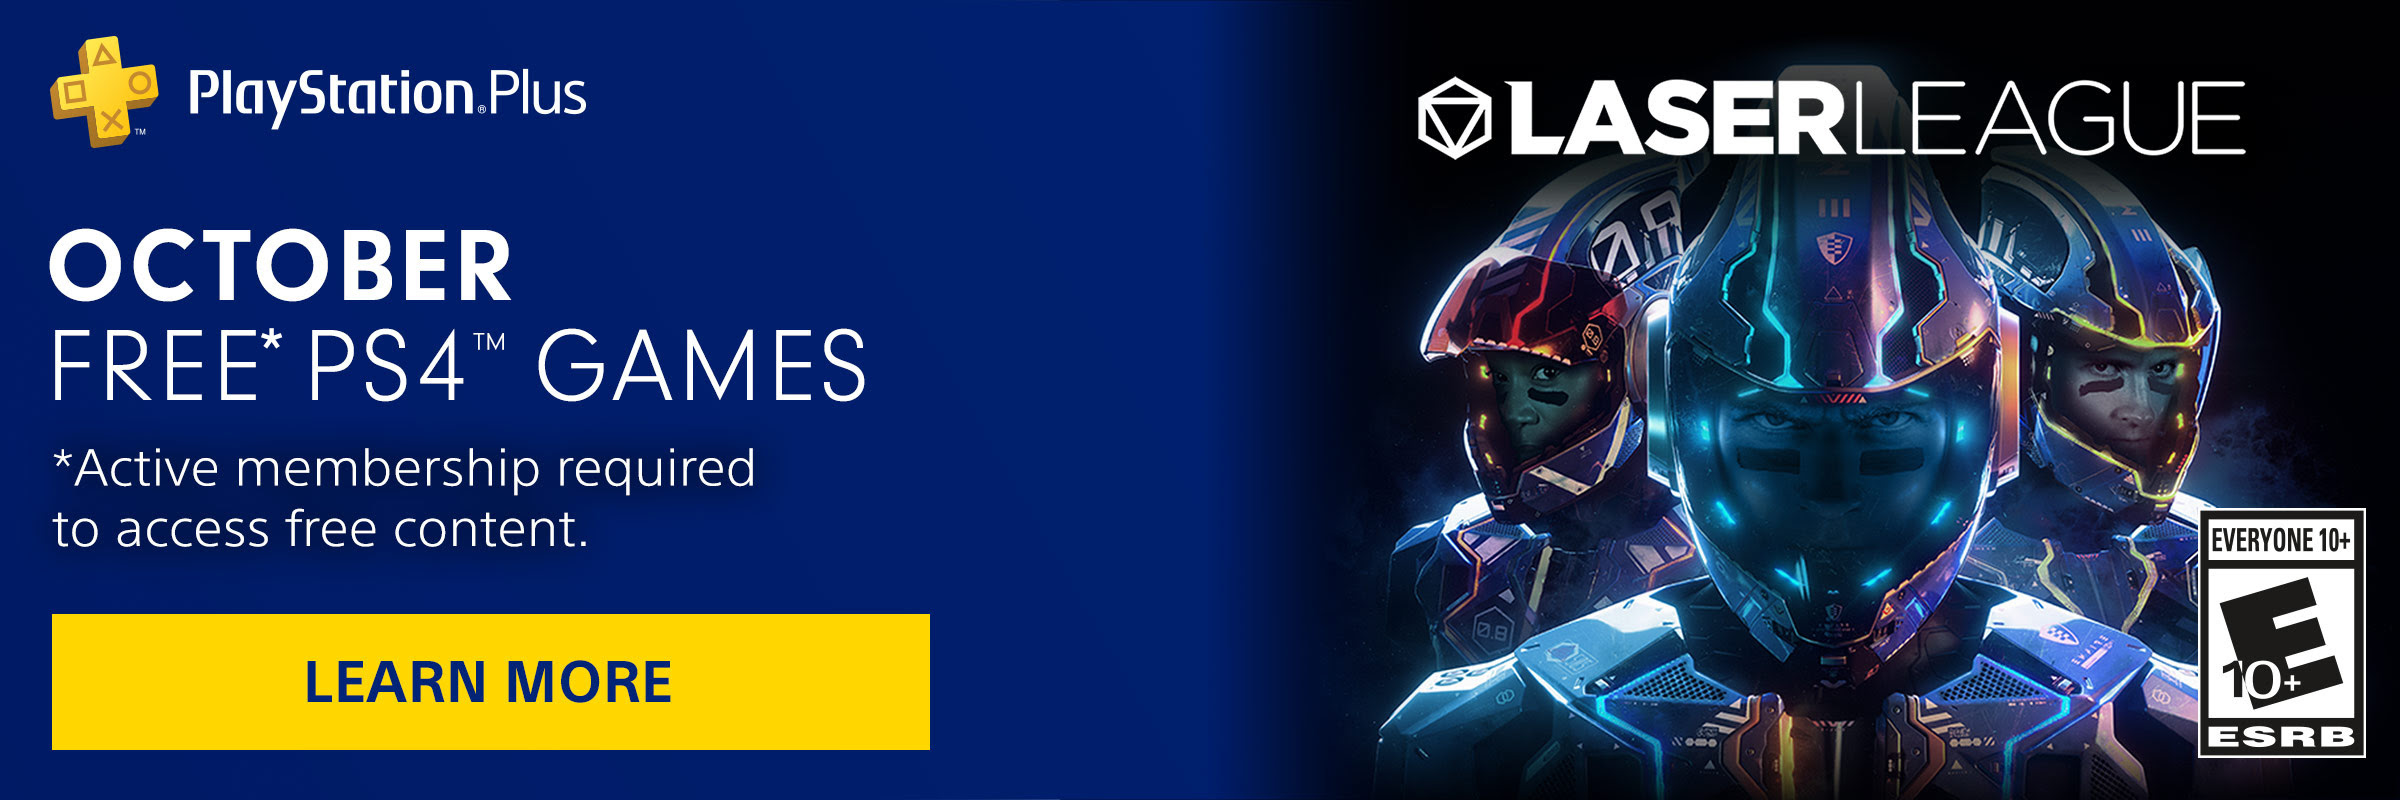 PlayStation Plus | OCTOBER FREE PS4(TM) GAMES * Active membership required to access free content. | LEARN MORE | Rated E10+ - M